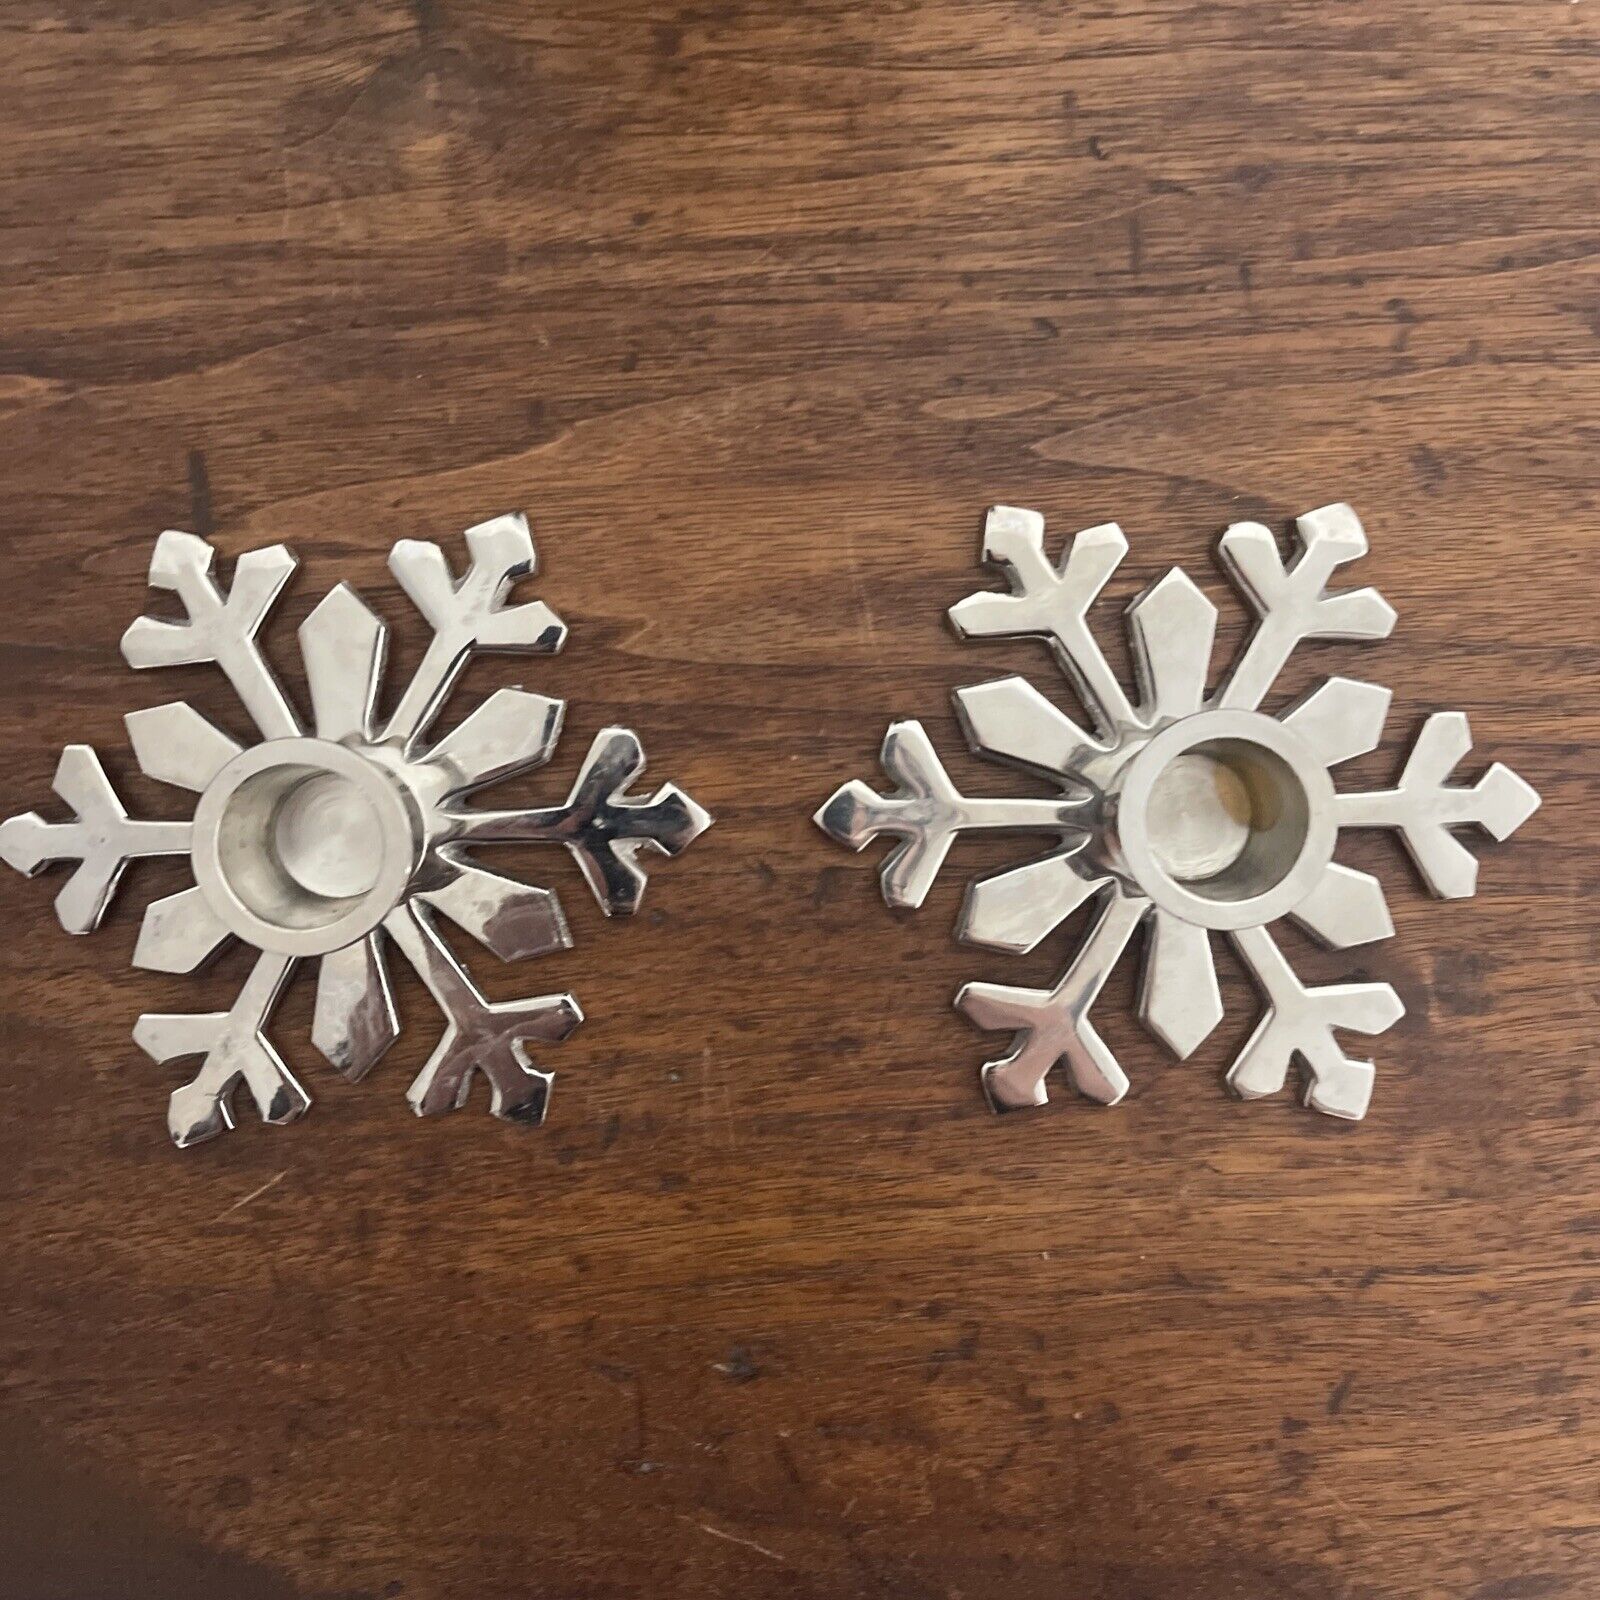 Vintage Metal Candle Holder Pair Snowflake Decor Made in India Holiday Christmas